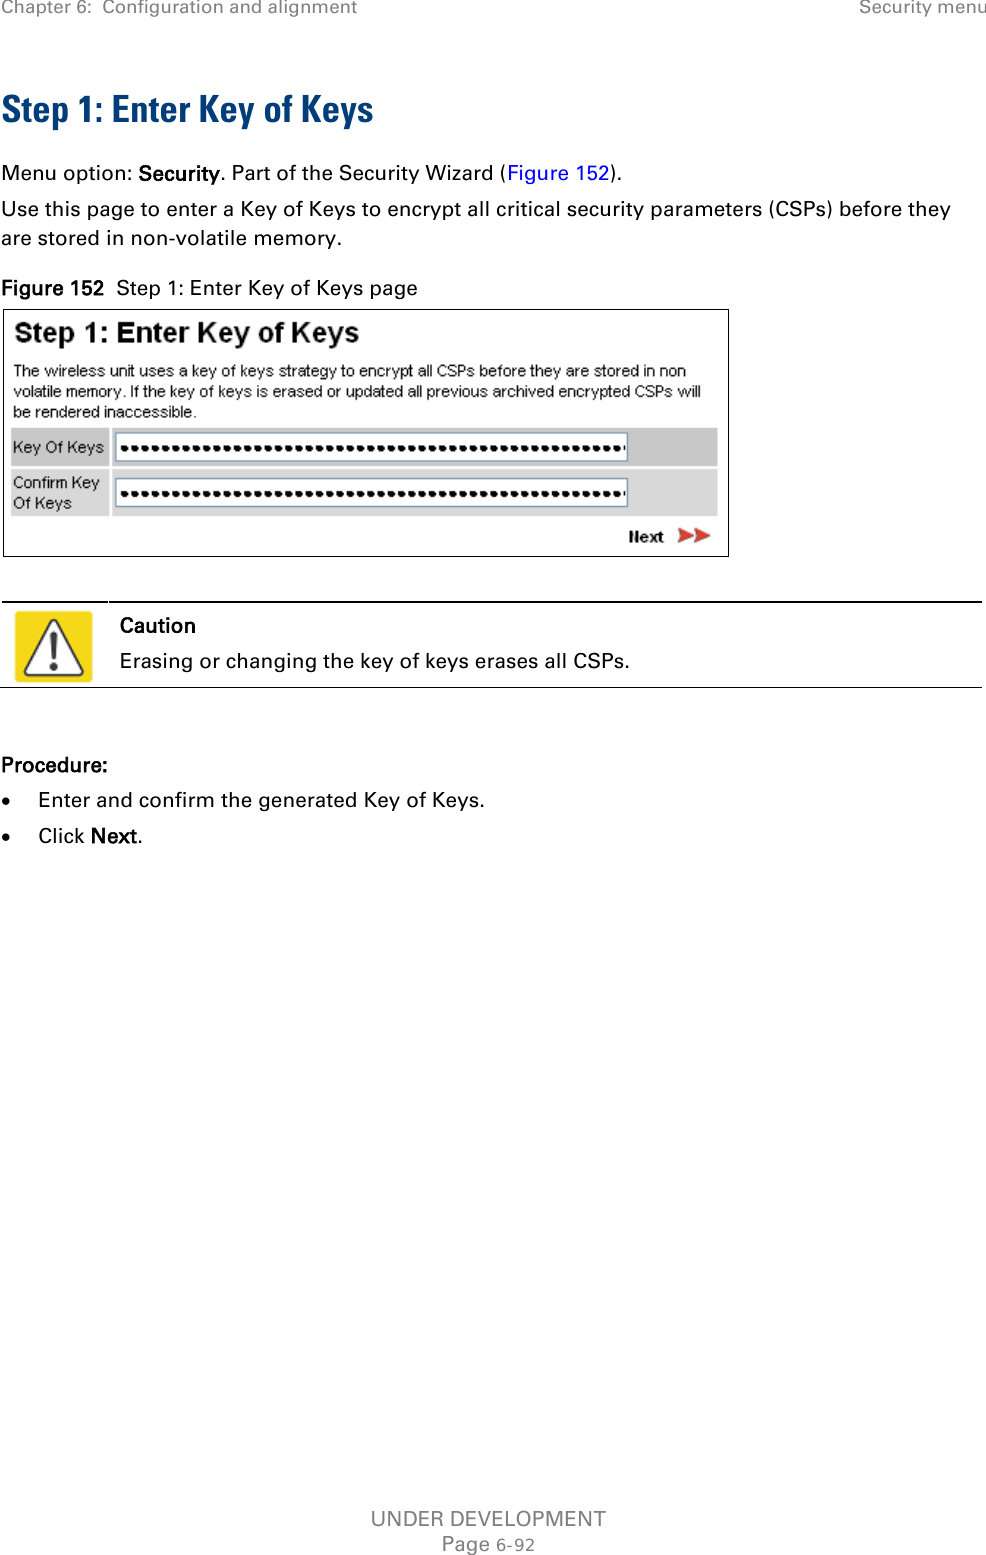 Chapter 6:  Configuration and alignment Security menu  Step 1: Enter Key of Keys Menu option: Security. Part of the Security Wizard (Figure 152). Use this page to enter a Key of Keys to encrypt all critical security parameters (CSPs) before they are stored in non-volatile memory. Figure 152  Step 1: Enter Key of Keys page    Caution Erasing or changing the key of keys erases all CSPs.  Procedure: • Enter and confirm the generated Key of Keys. • Click Next. UNDER DEVELOPMENT Page 6-92 